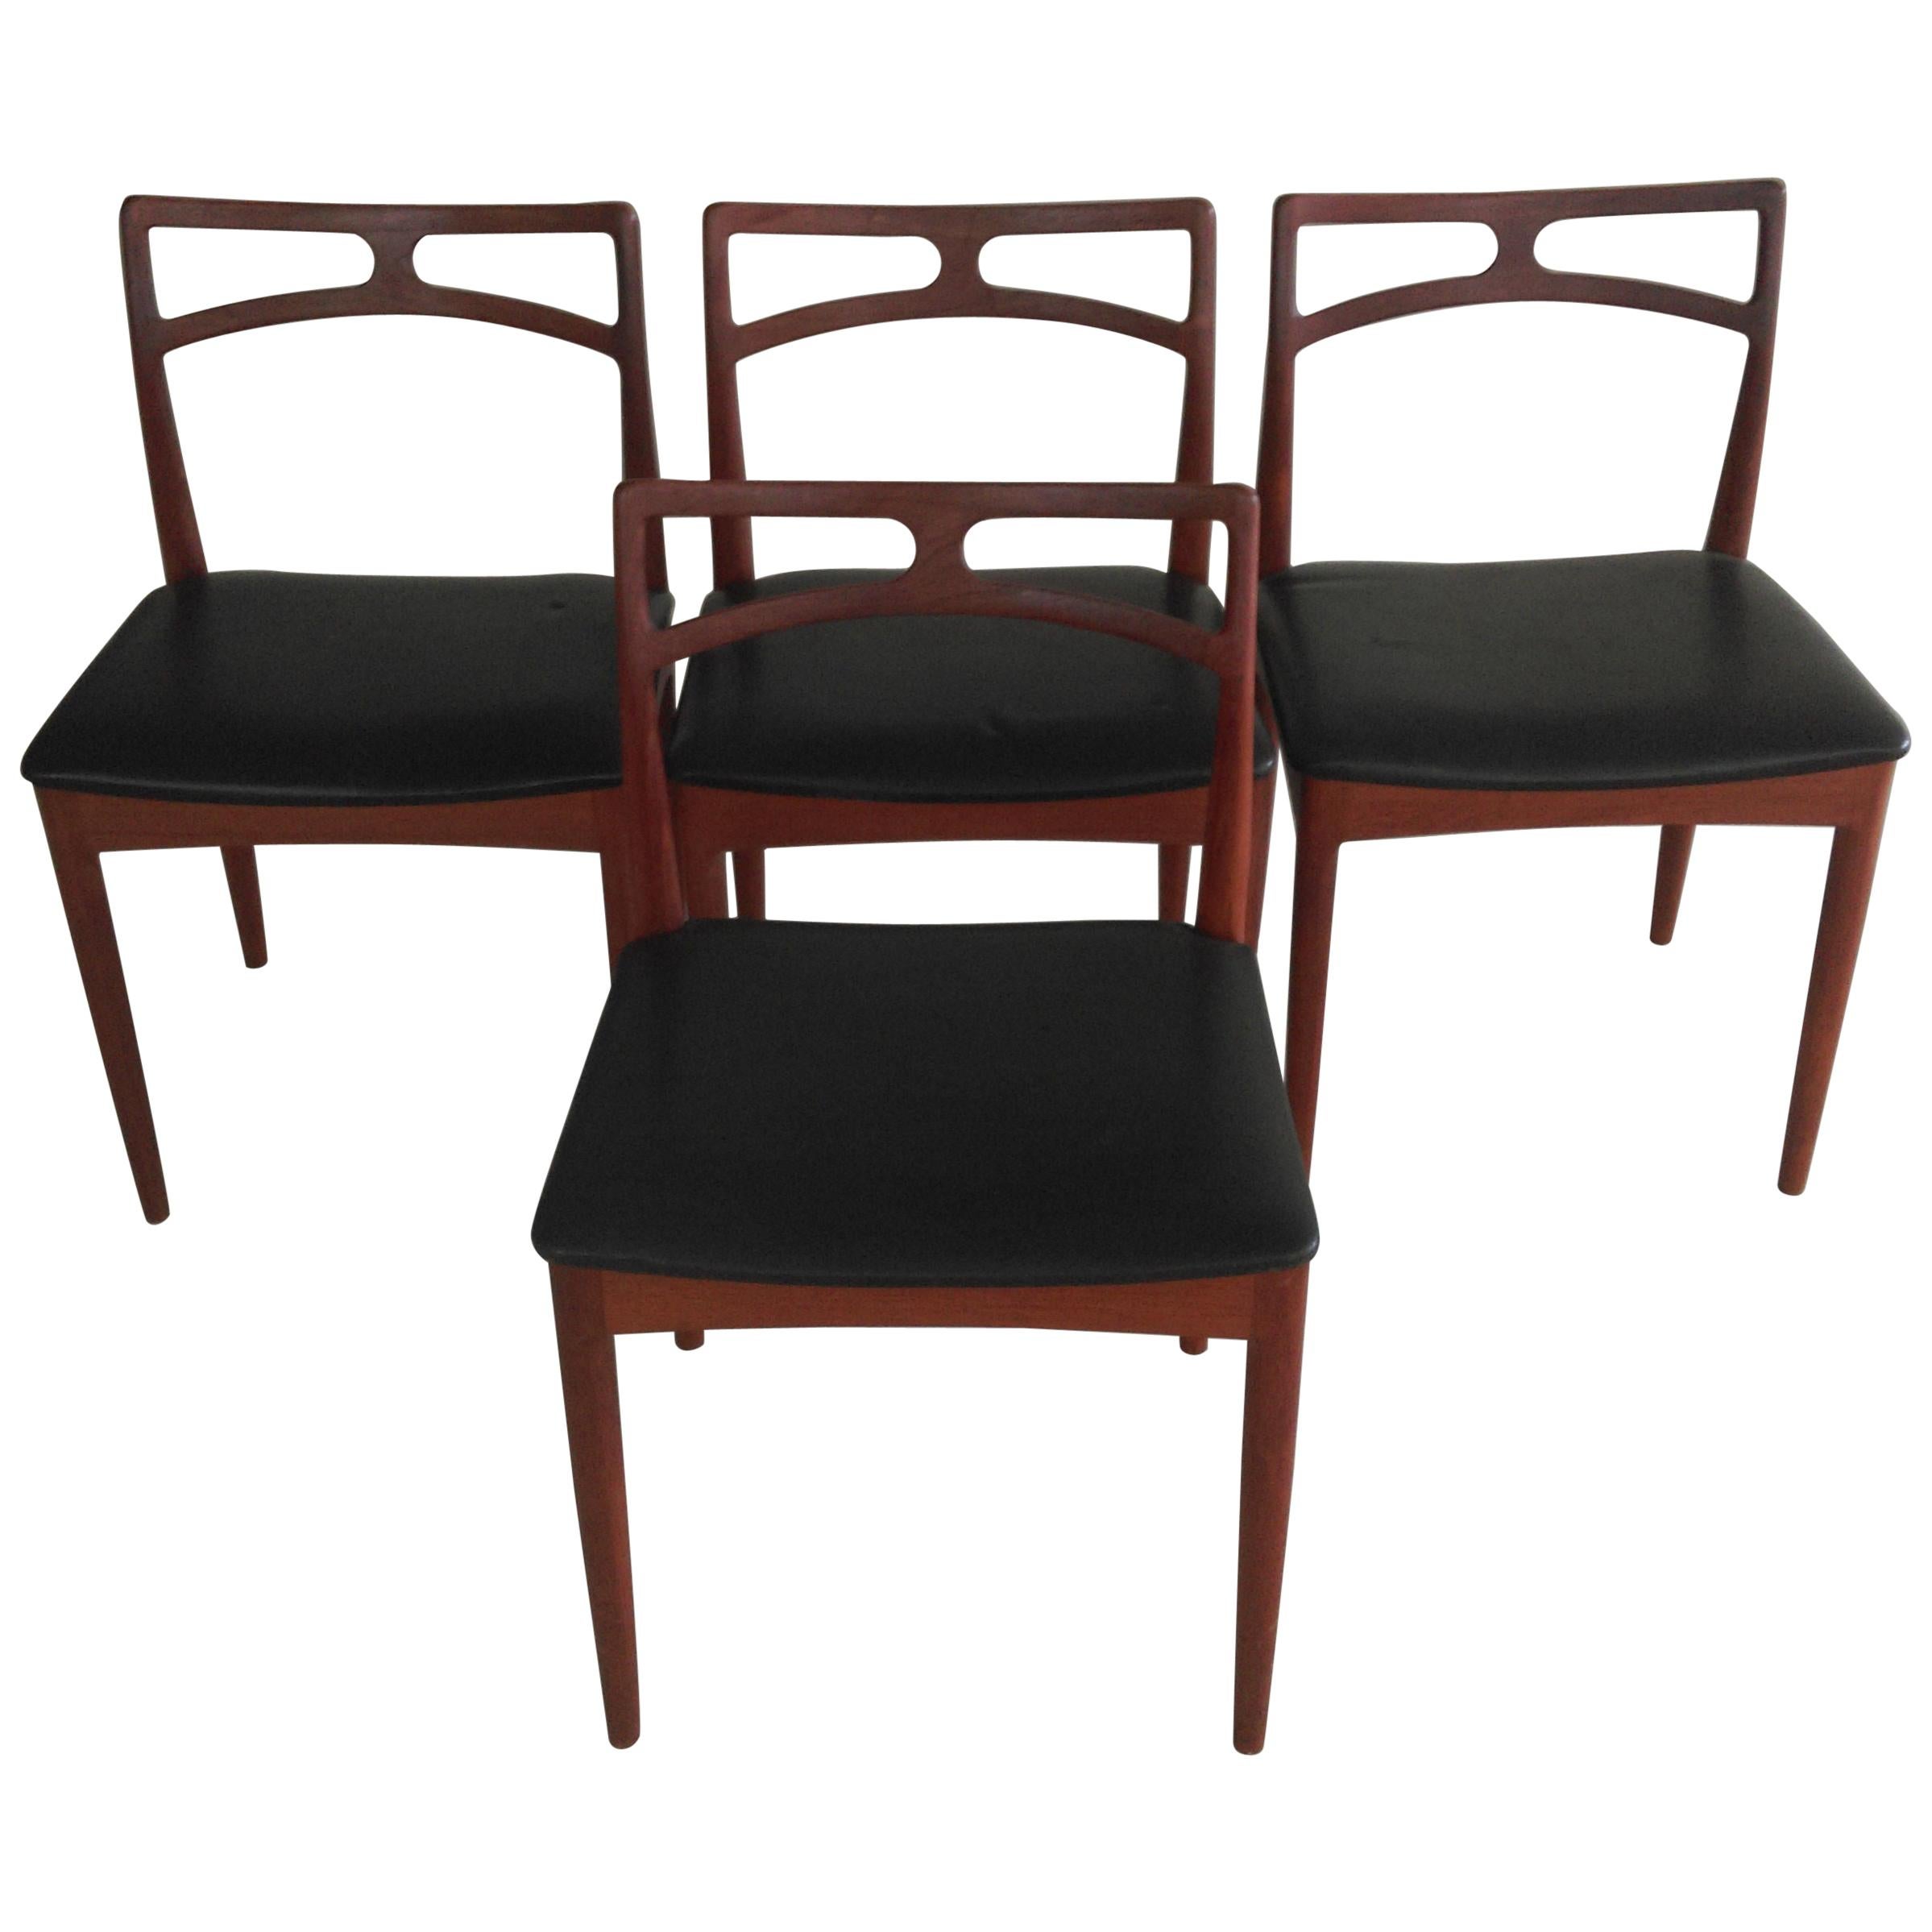 Set of Four Danish Johannes Andersen Dining Chairs in Teak, Inc. Reupholstery